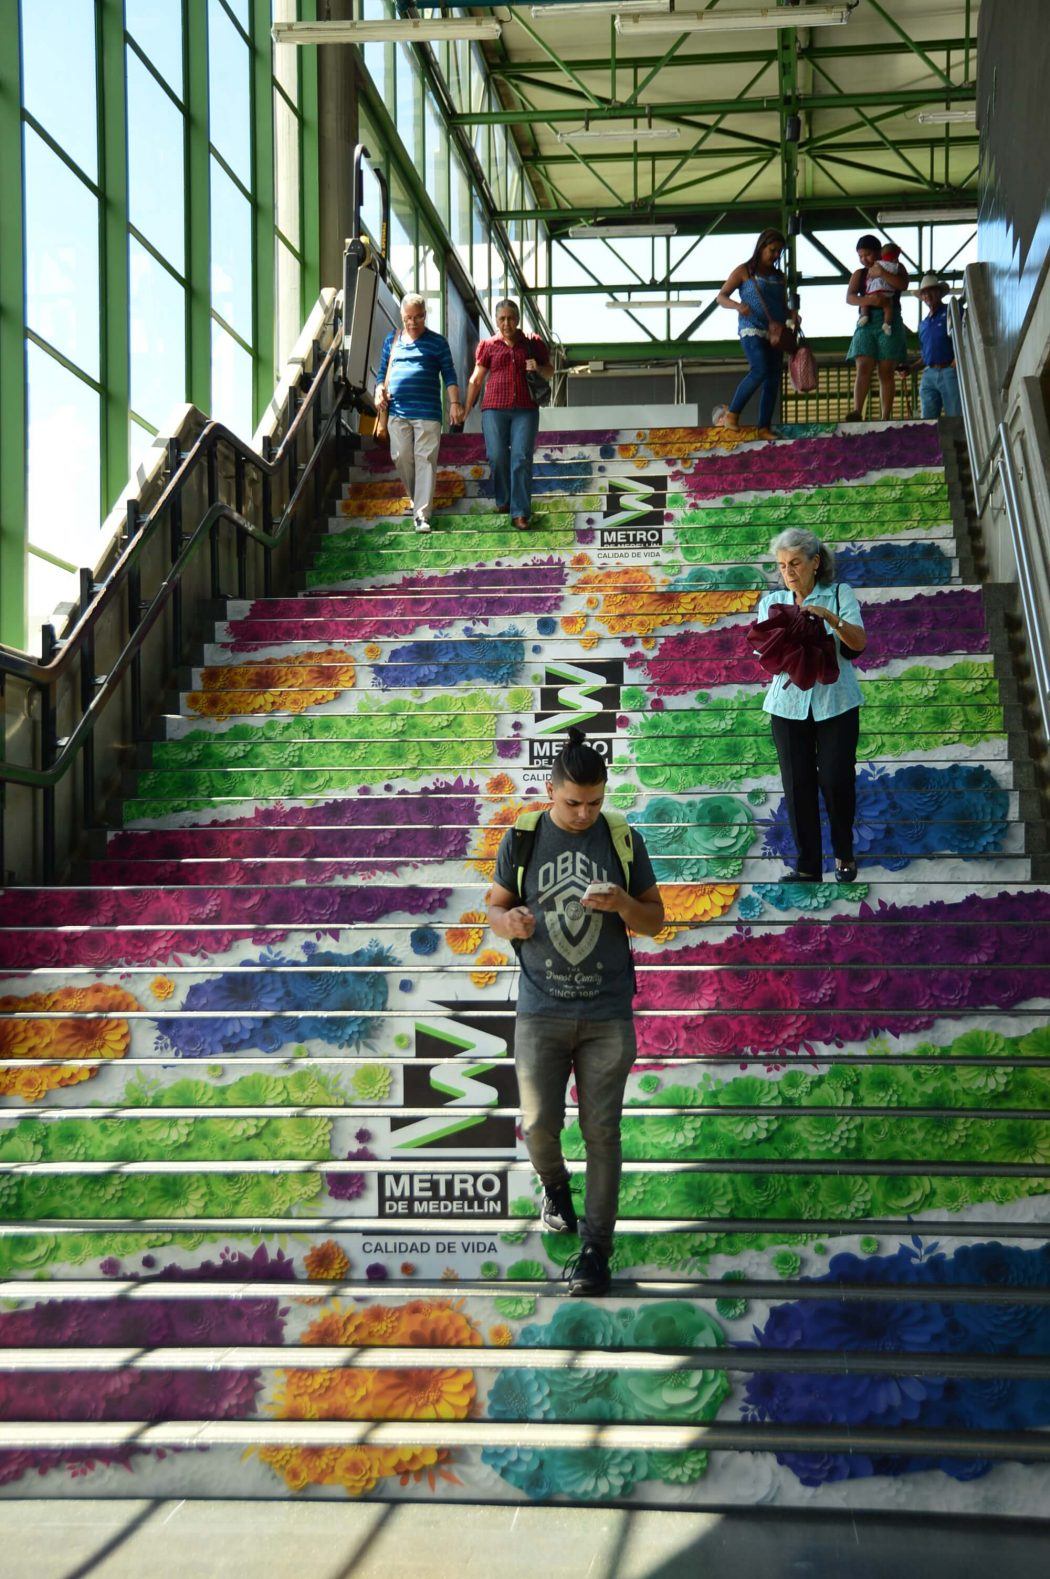 steps of medellin metro decorate with floral images